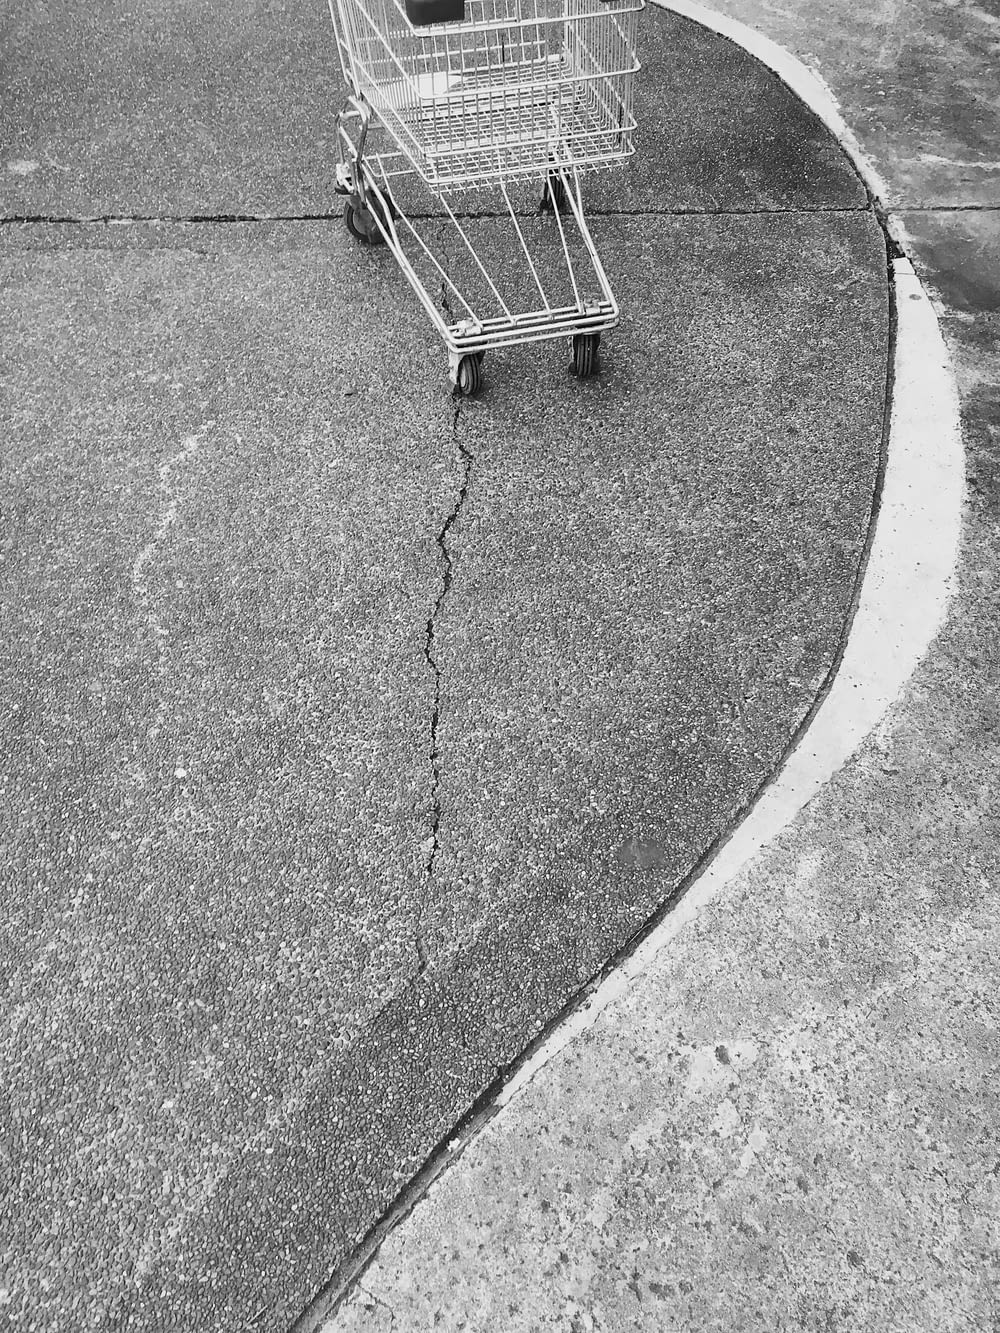 a black and white photo of a shopping cart